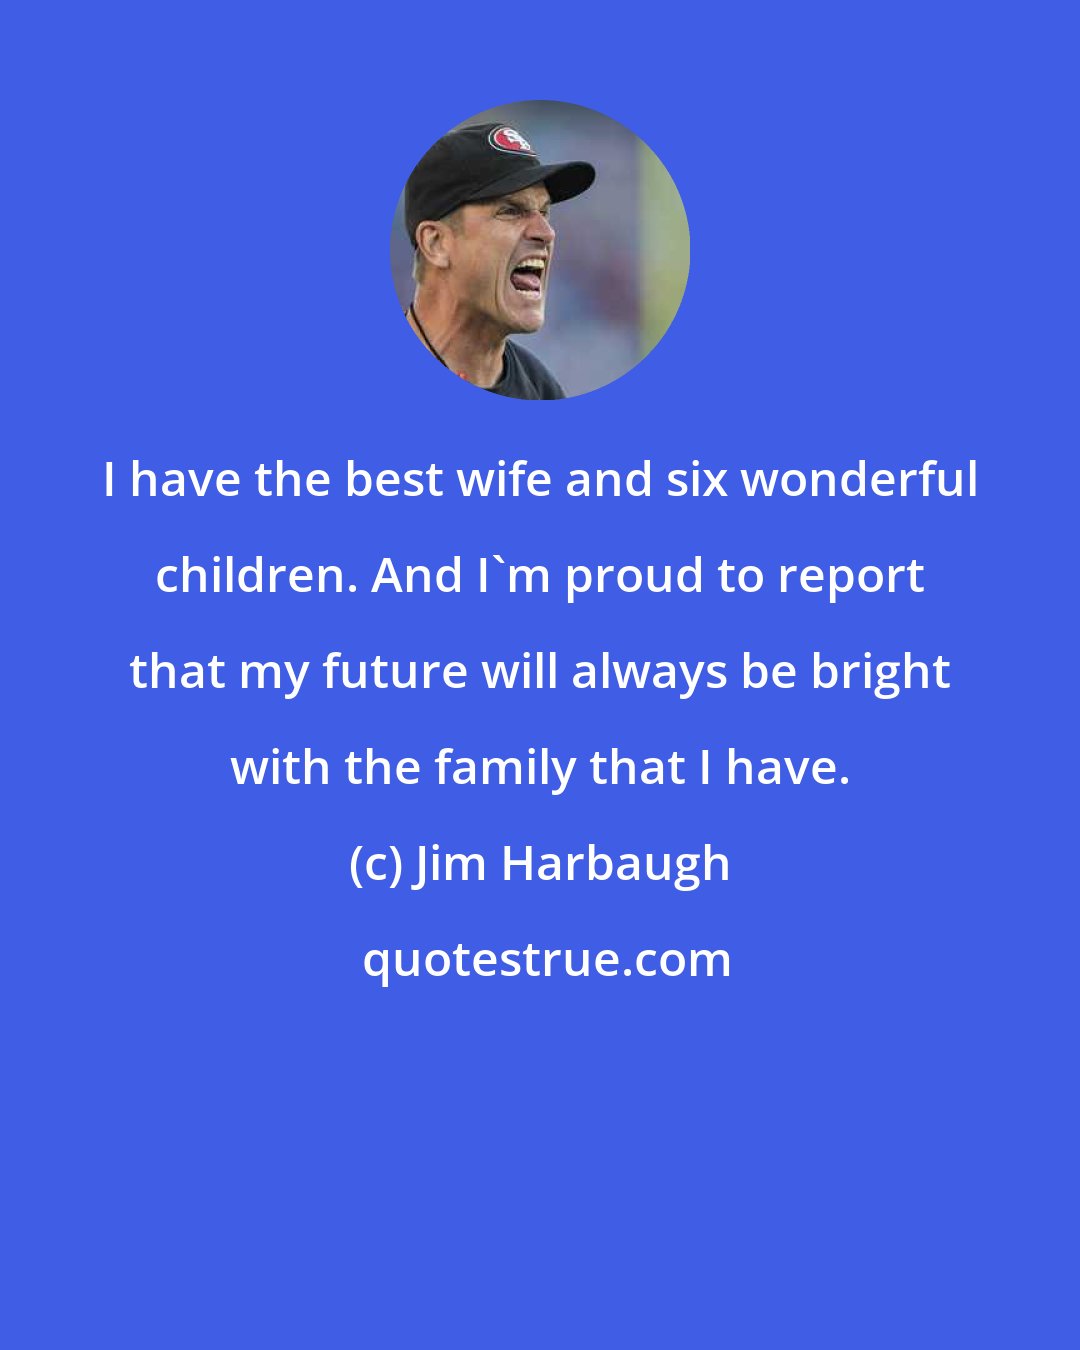 Jim Harbaugh: I have the best wife and six wonderful children. And I'm proud to report that my future will always be bright with the family that I have.